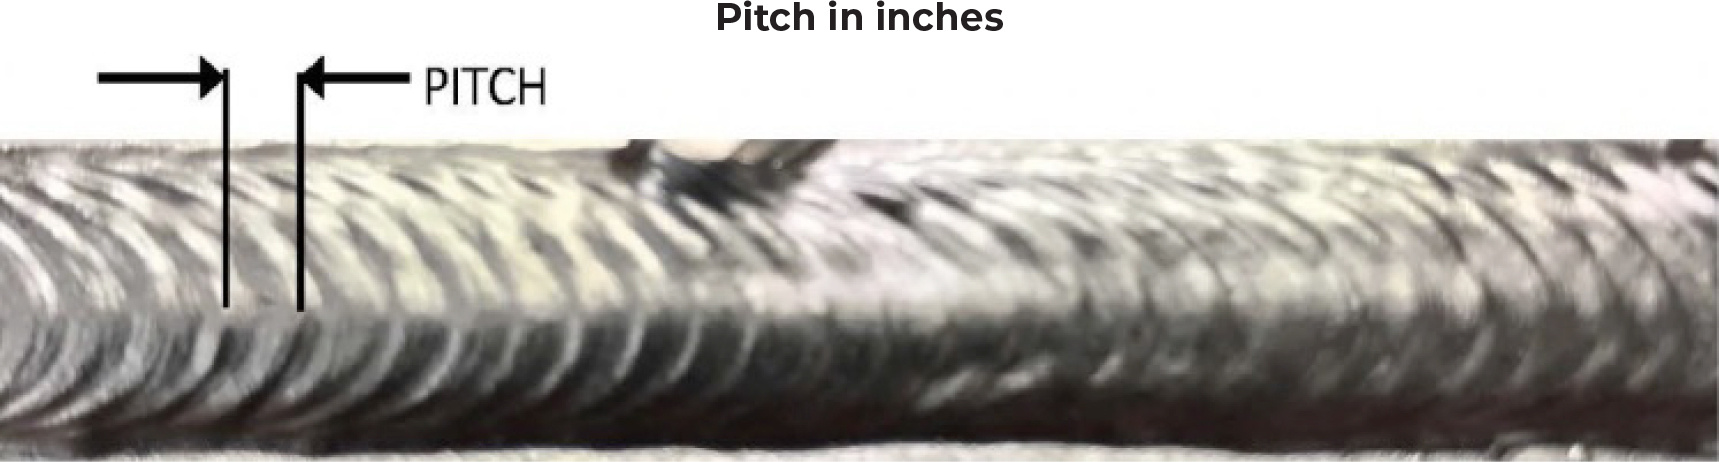 Pitch-Inches